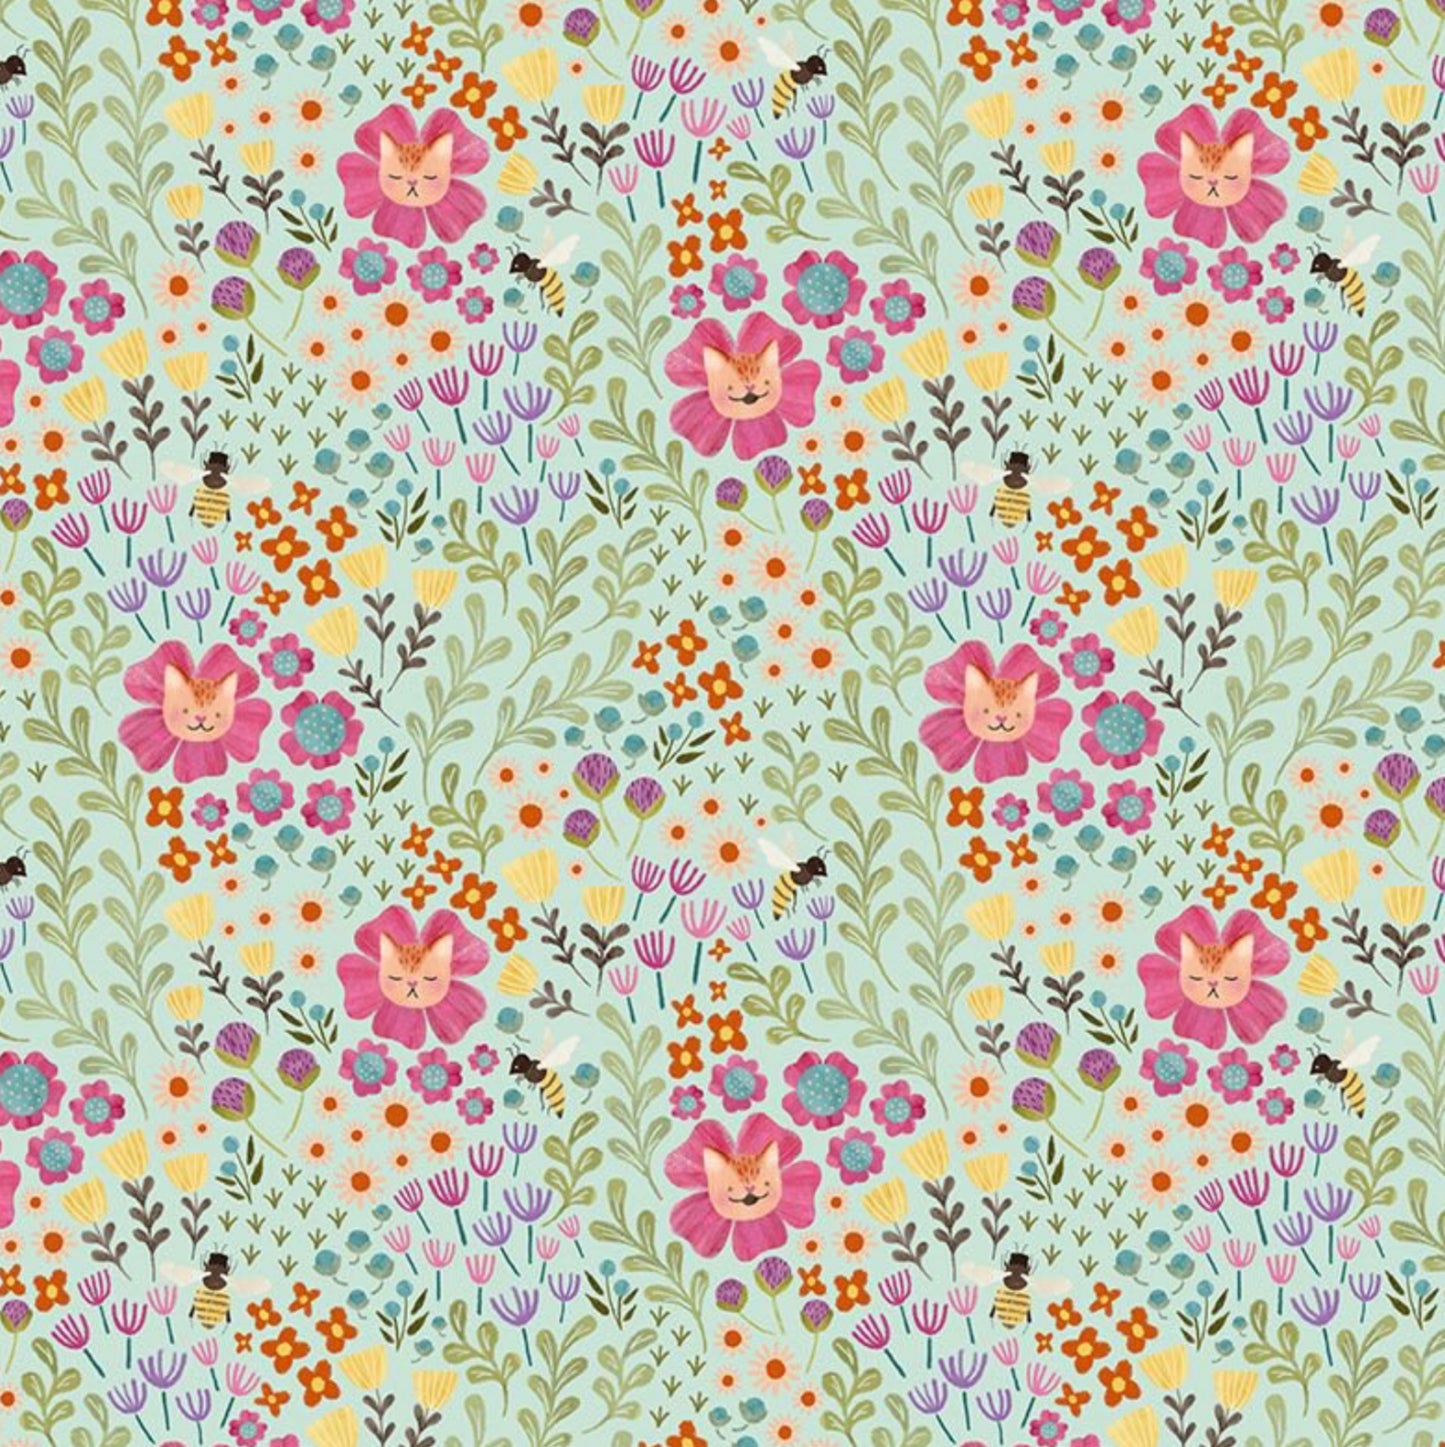 Feline Floral Fabric from the Curious Garden Collection by Pammie Jane for Dear Stella Fabrics. Light green cotton floral with hidden kitties in the pink flowers. Purrfect for cat lovers everywhere!